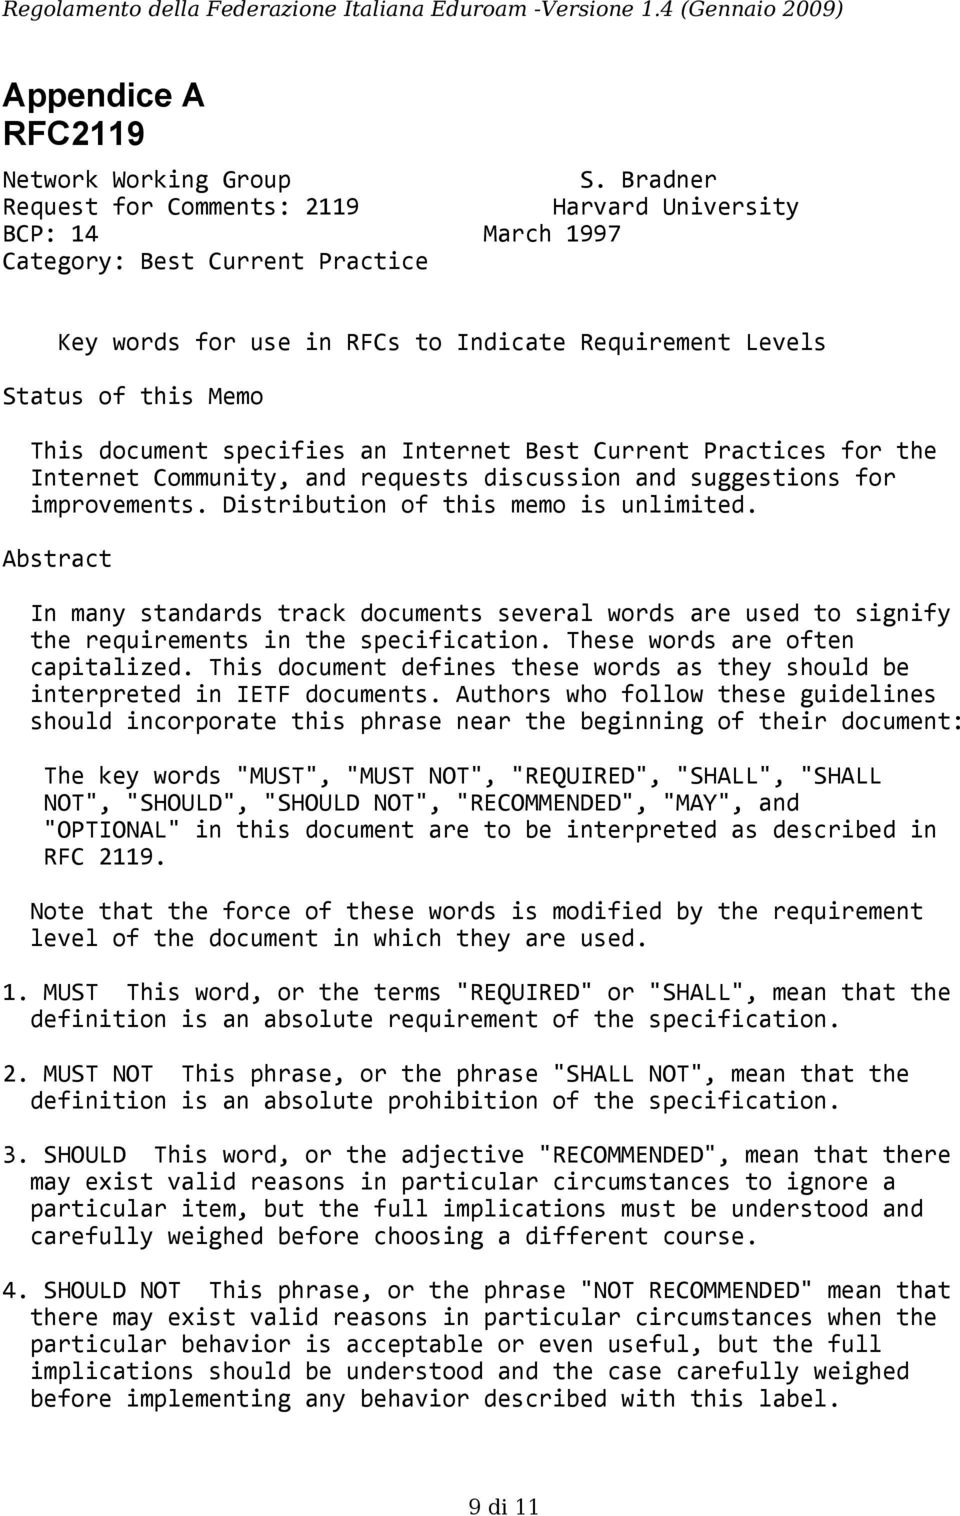 specifies an Internet Best Current Practices for the Internet Community, and requests discussion and suggestions for improvements. Distribution of this memo is unlimited.